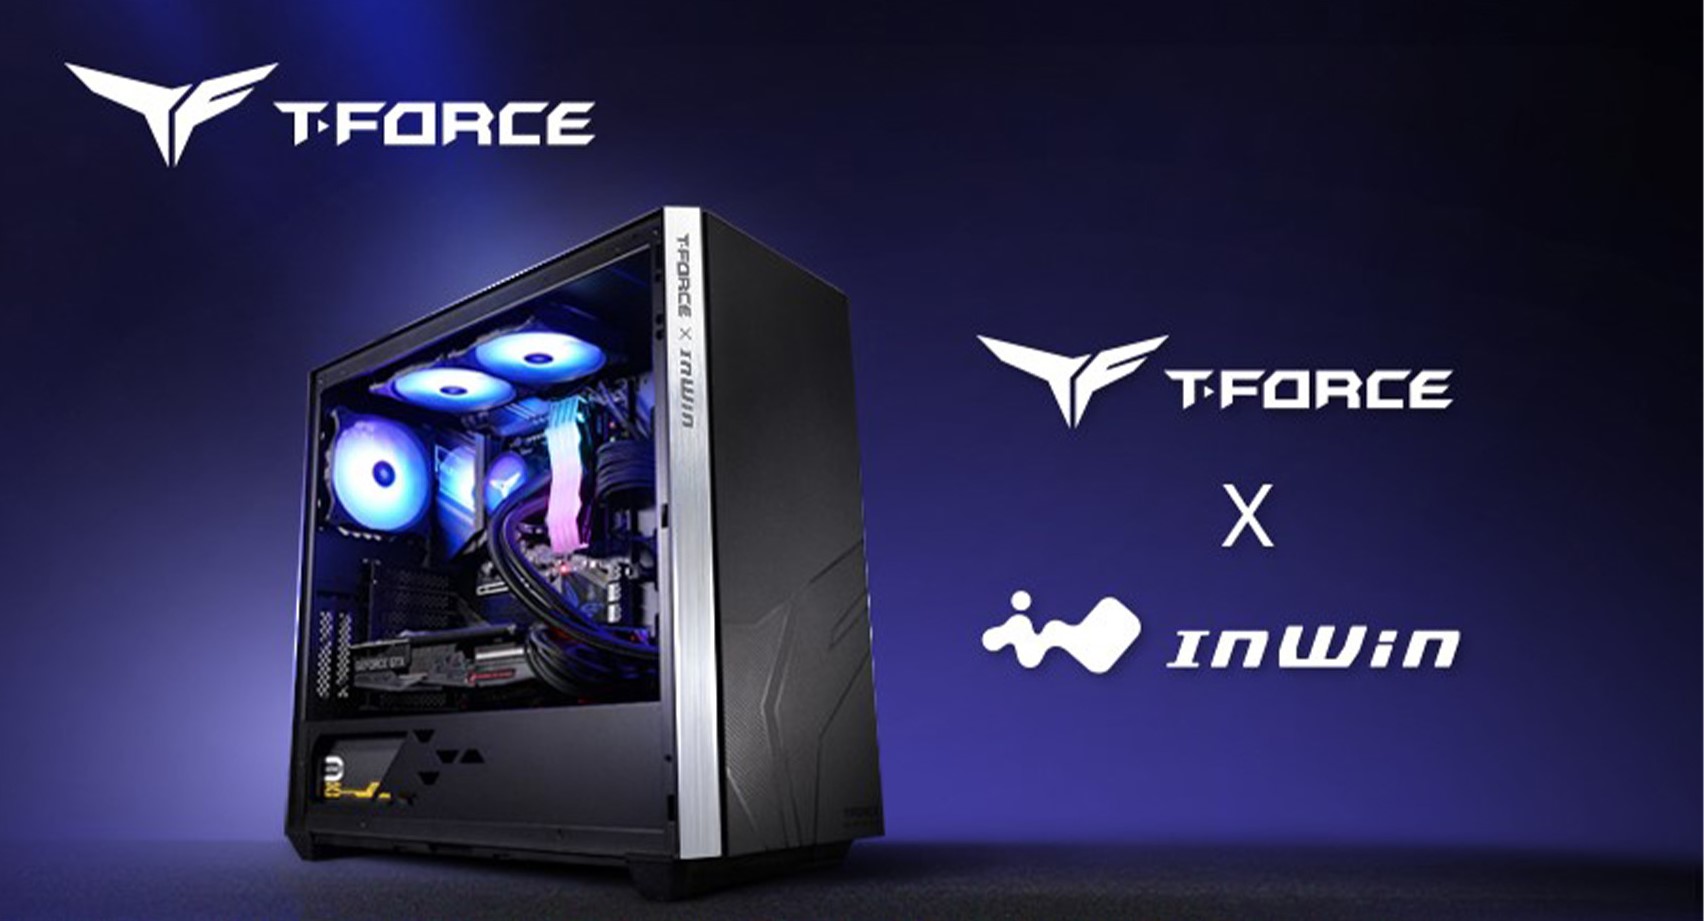 TEAMGROUP Announces First T-FORCE x InWin 216 Case, GamersRD